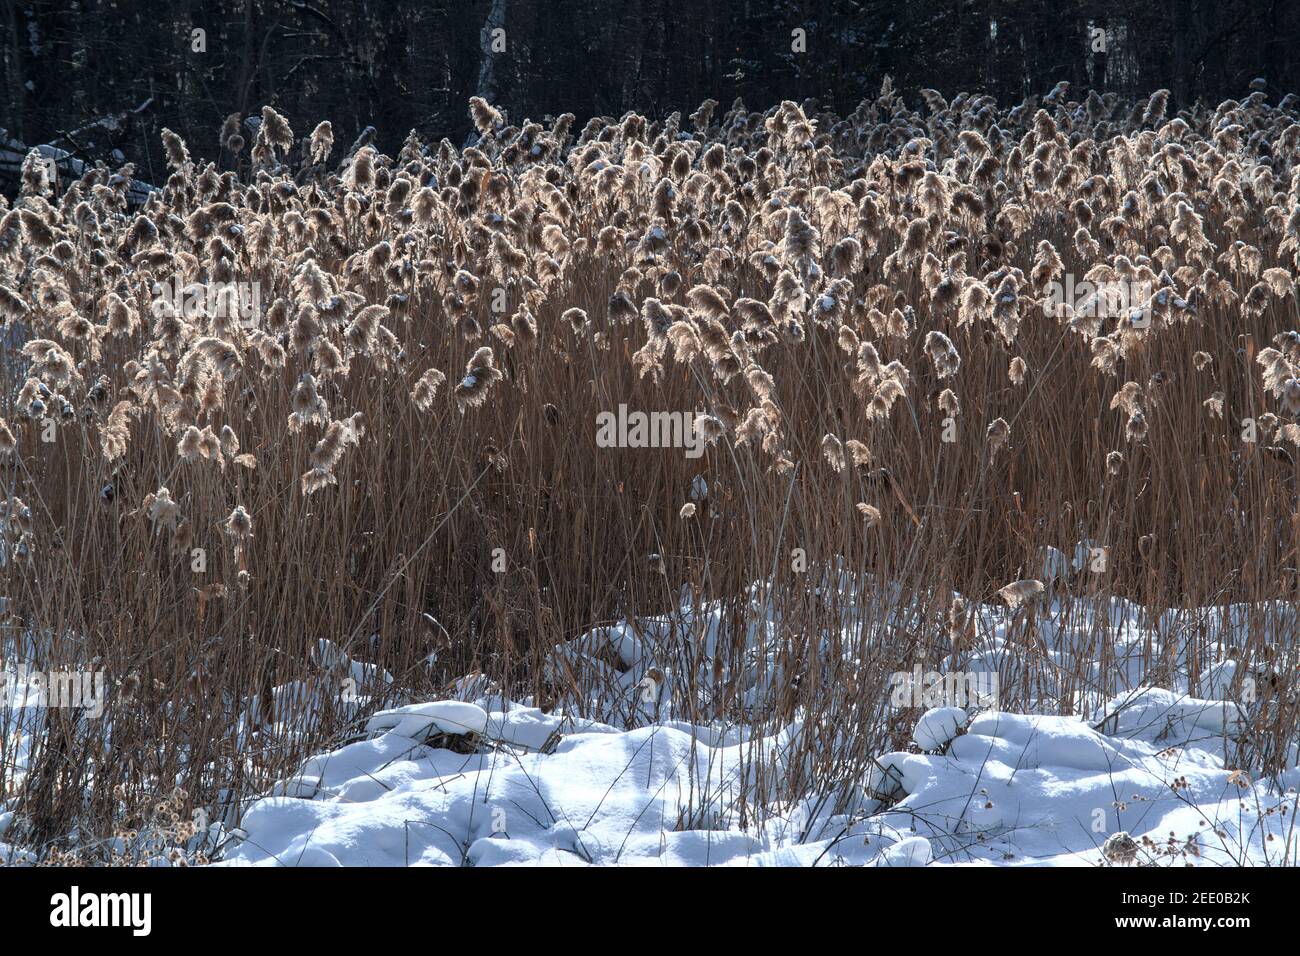 Winter grasses (Phragmites australis) in a snowy field are lit up by the late afternoon sun. Ottawa, Ontario, Canad Stock Photo